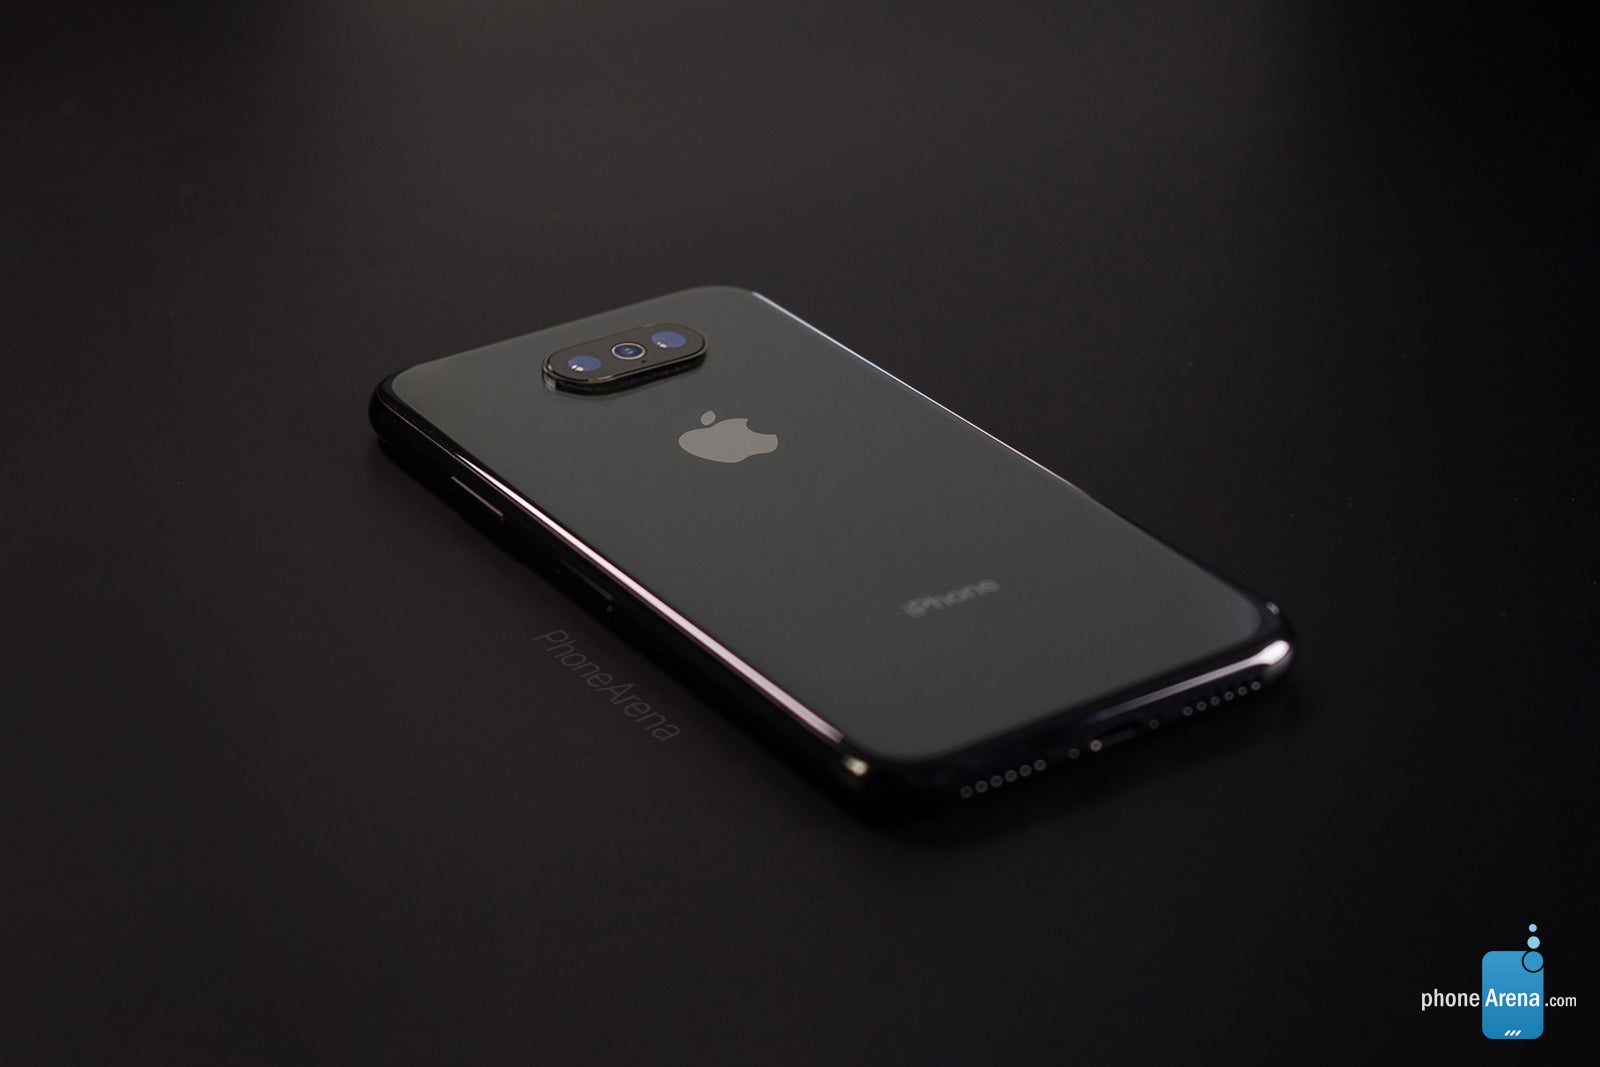 iPhone XI renders show what Dark Mode could look like in iOS 13